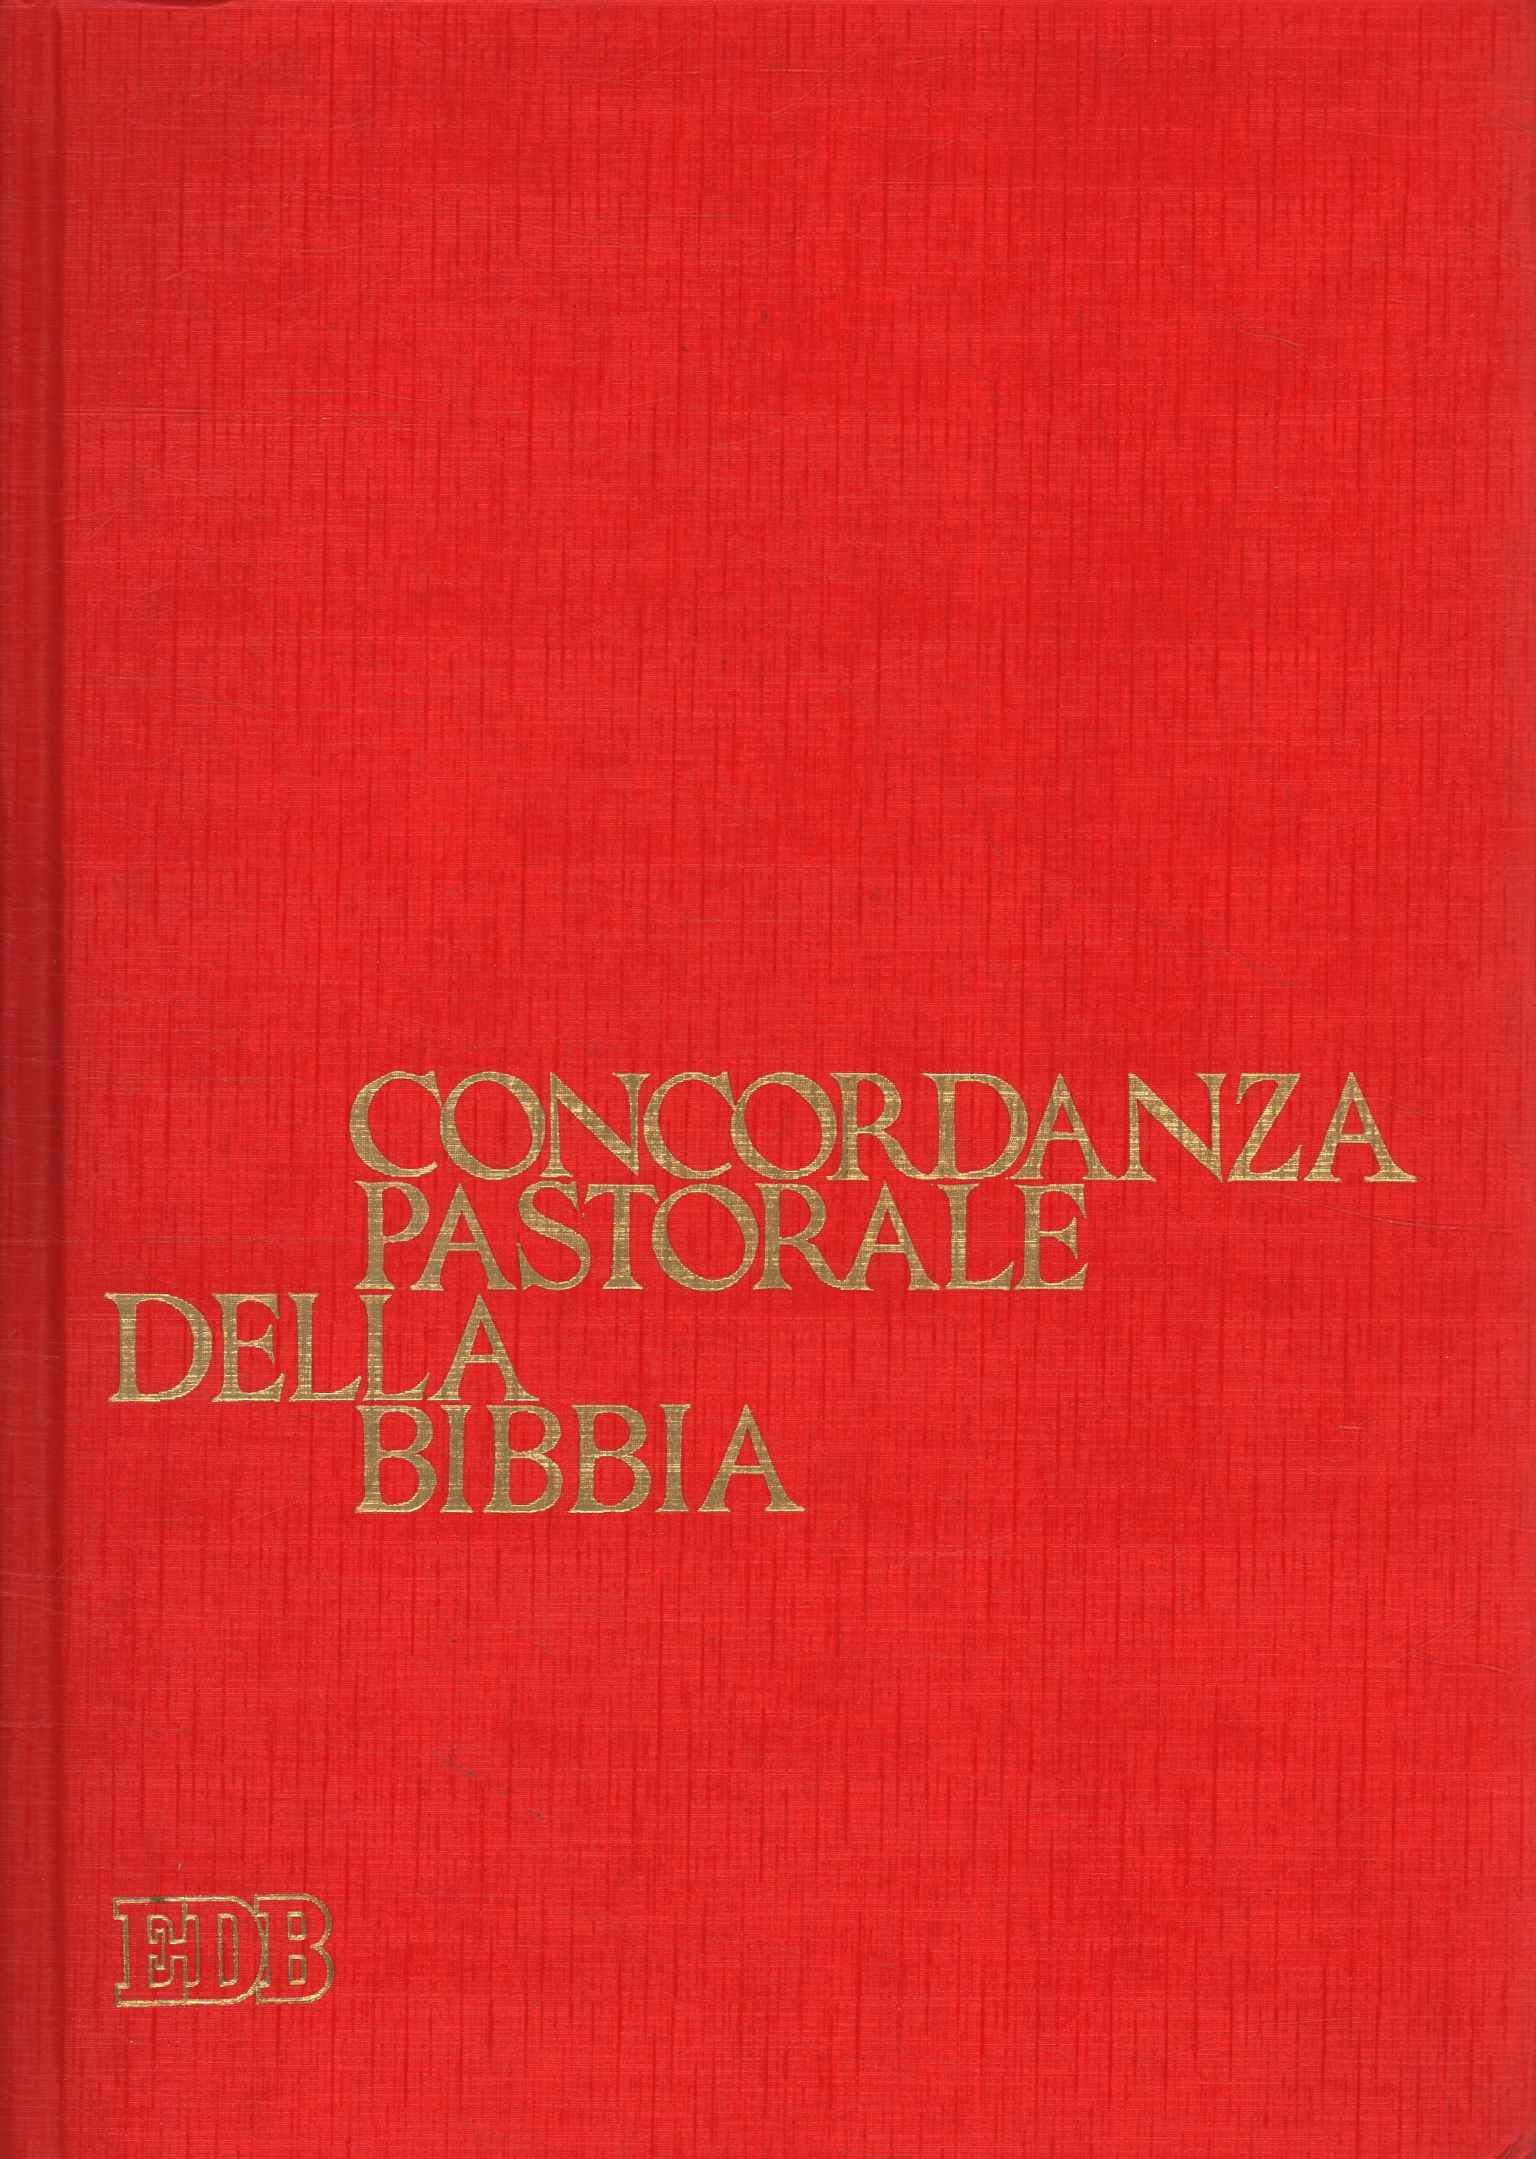 Pastoral Concordance of the Bible